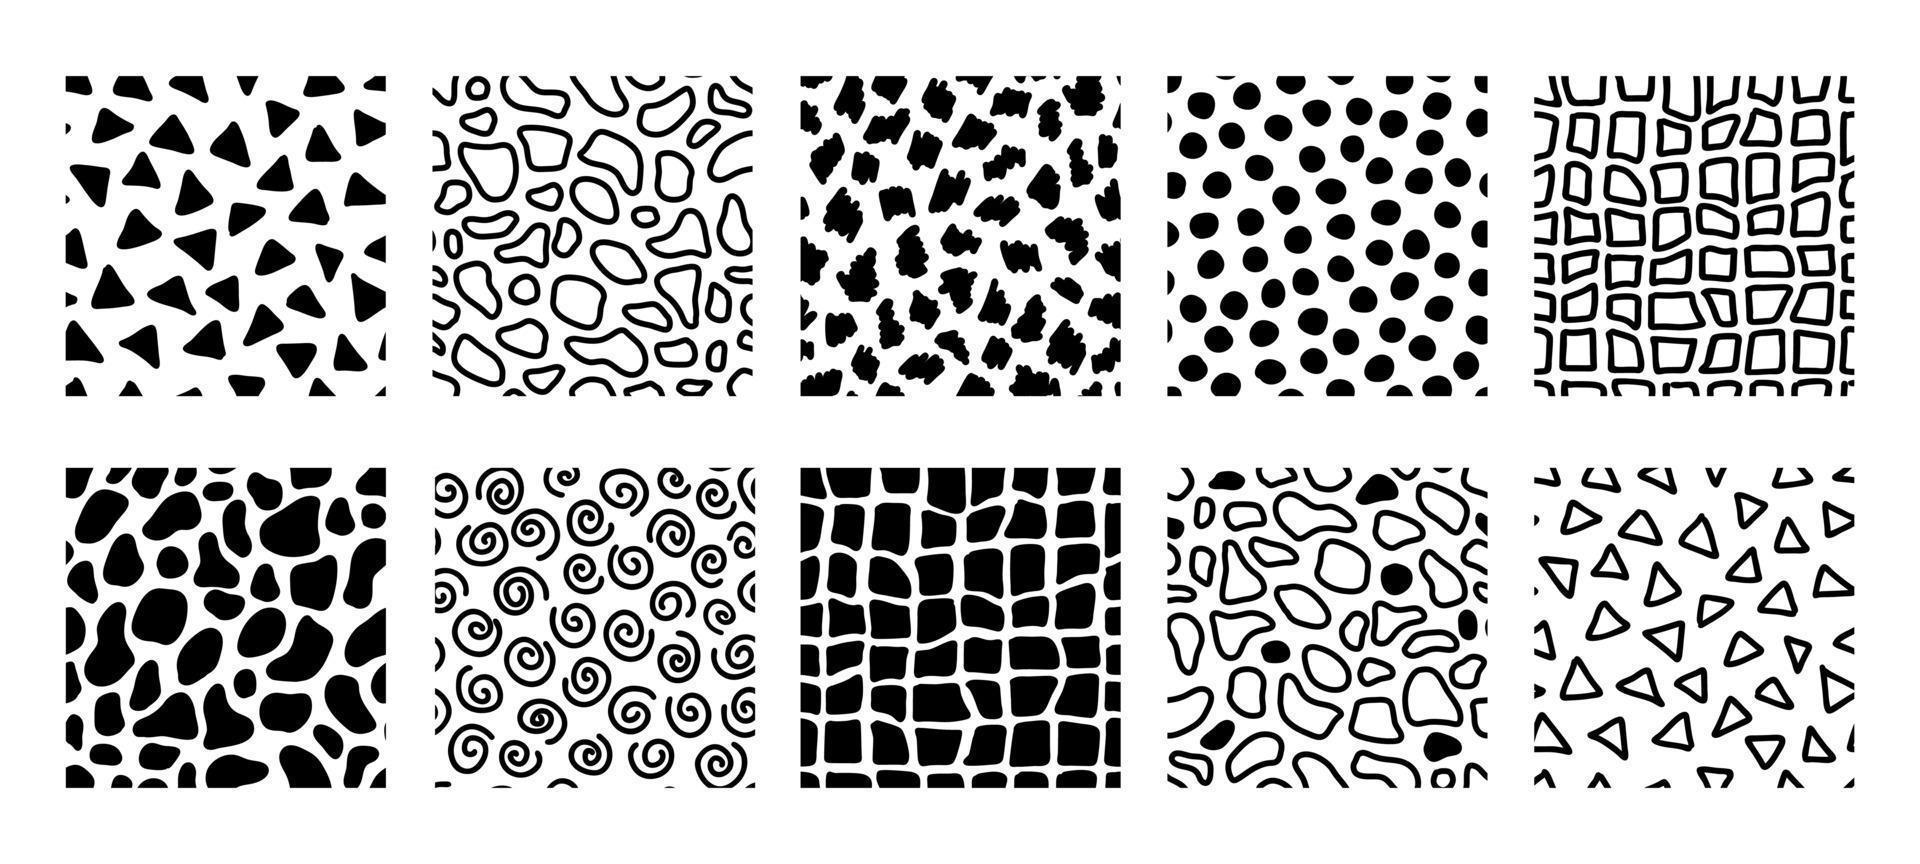 Big set of doodle hand drawn seamless patterns. Scribble sketch texture background. Organic shapes and geo vector illustration